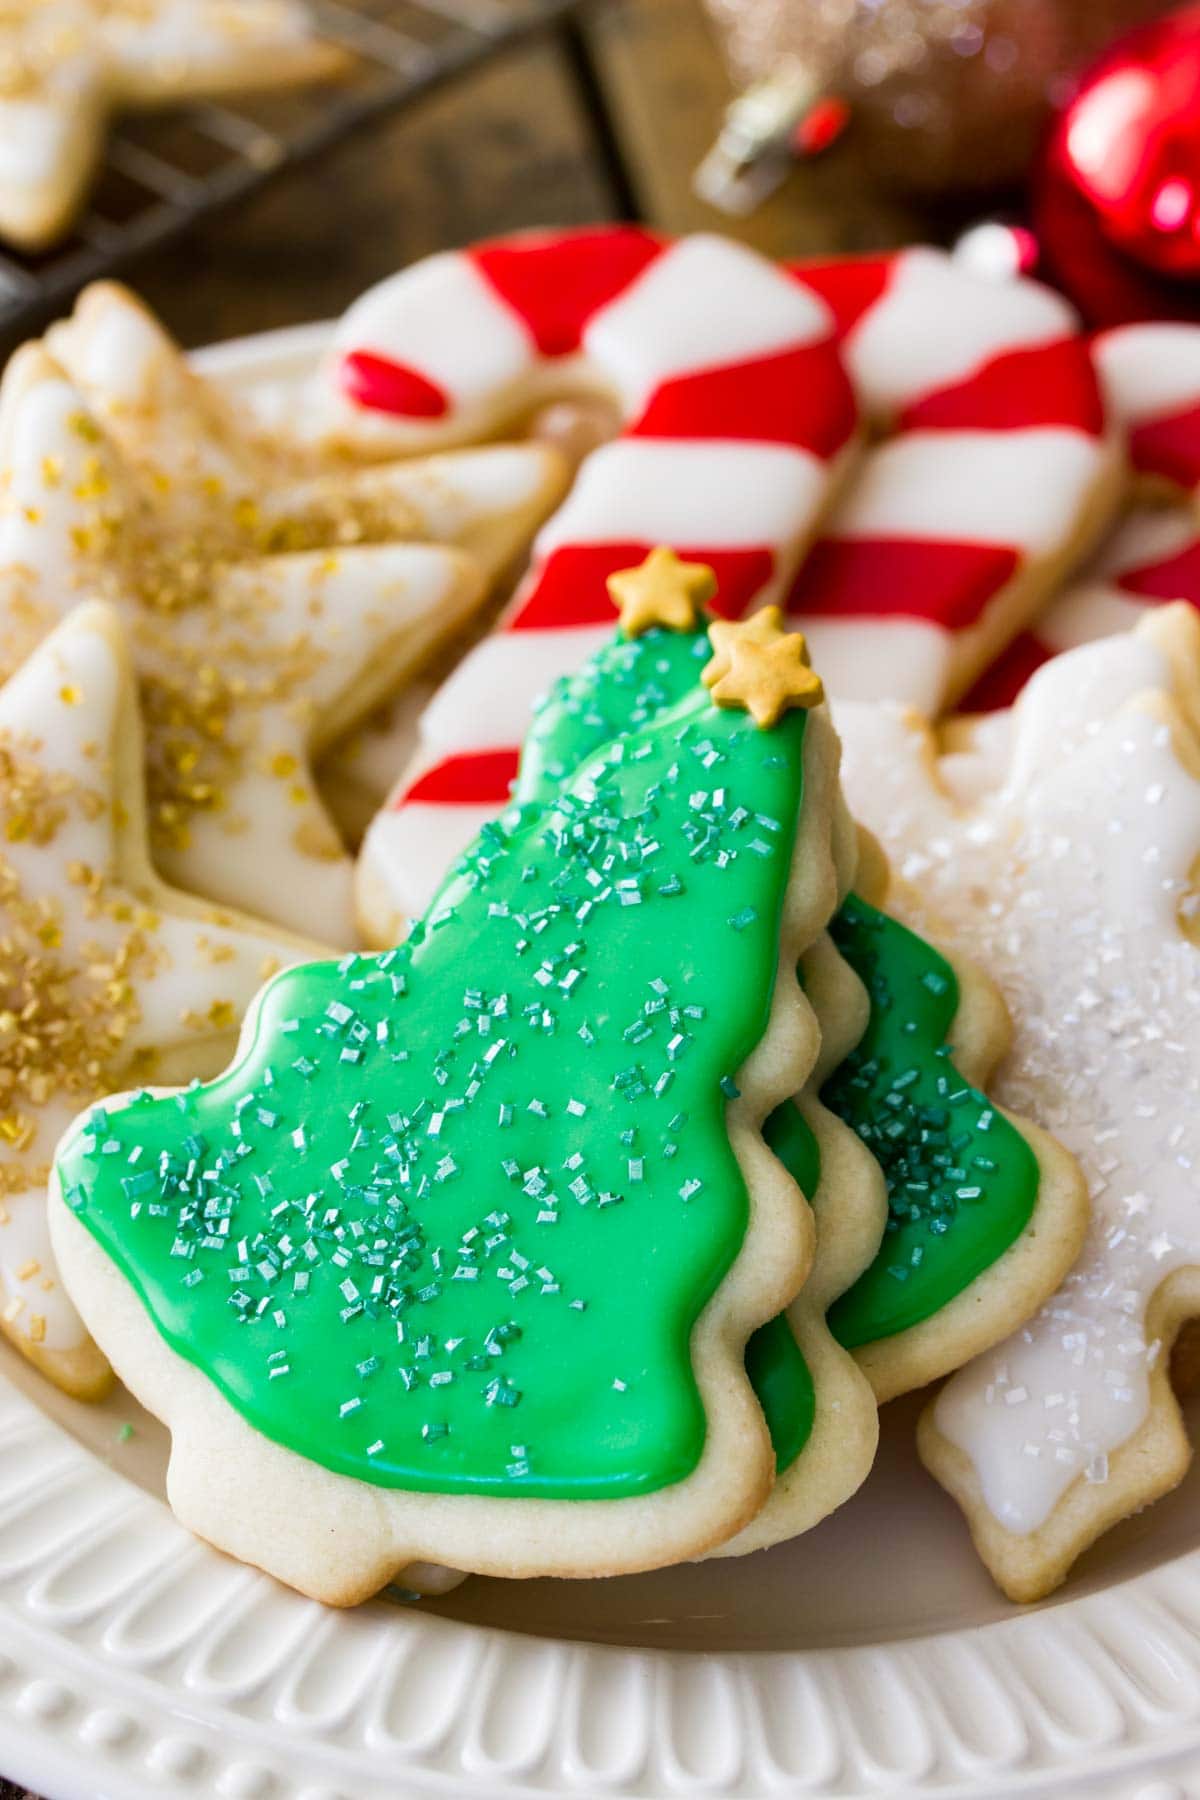 Plate of Christmas sugar cookies shaped and decorated as stars, candy canes, snowflakes and christmas trees